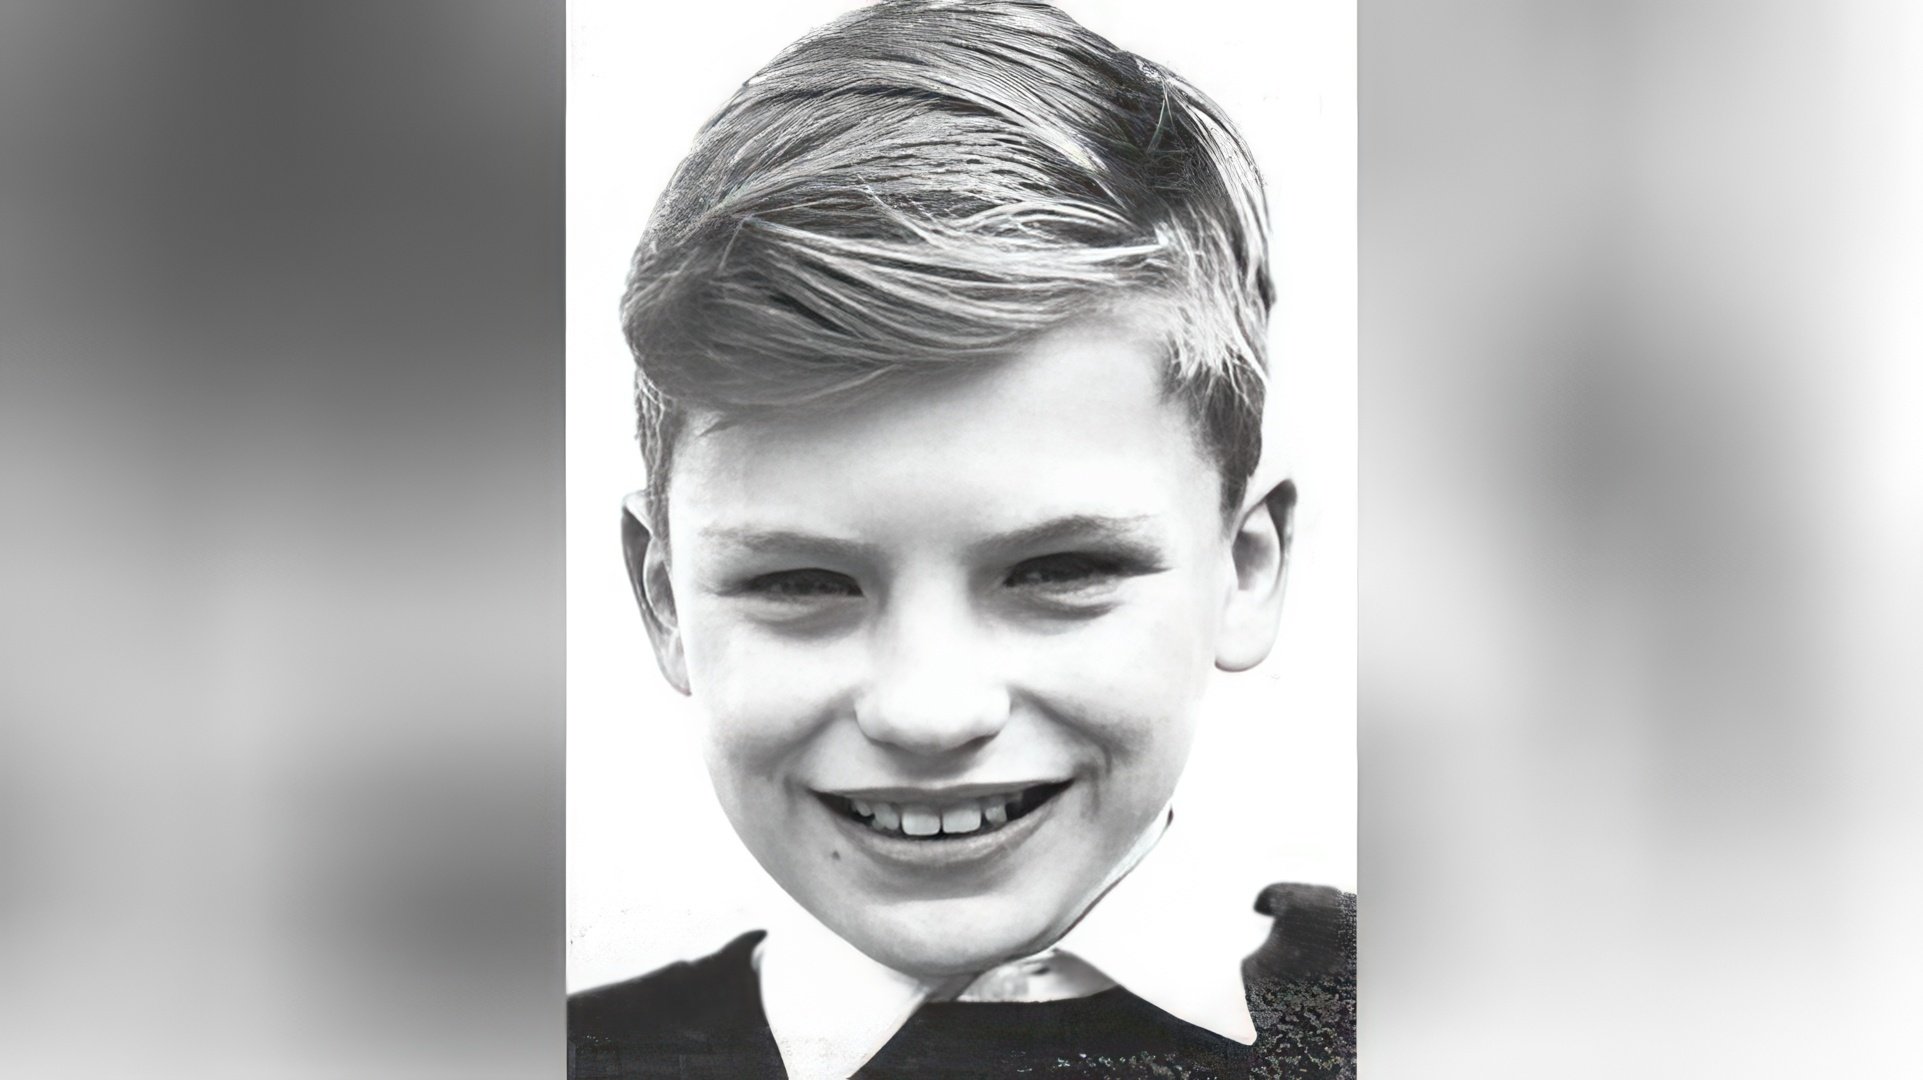 Sting as a child